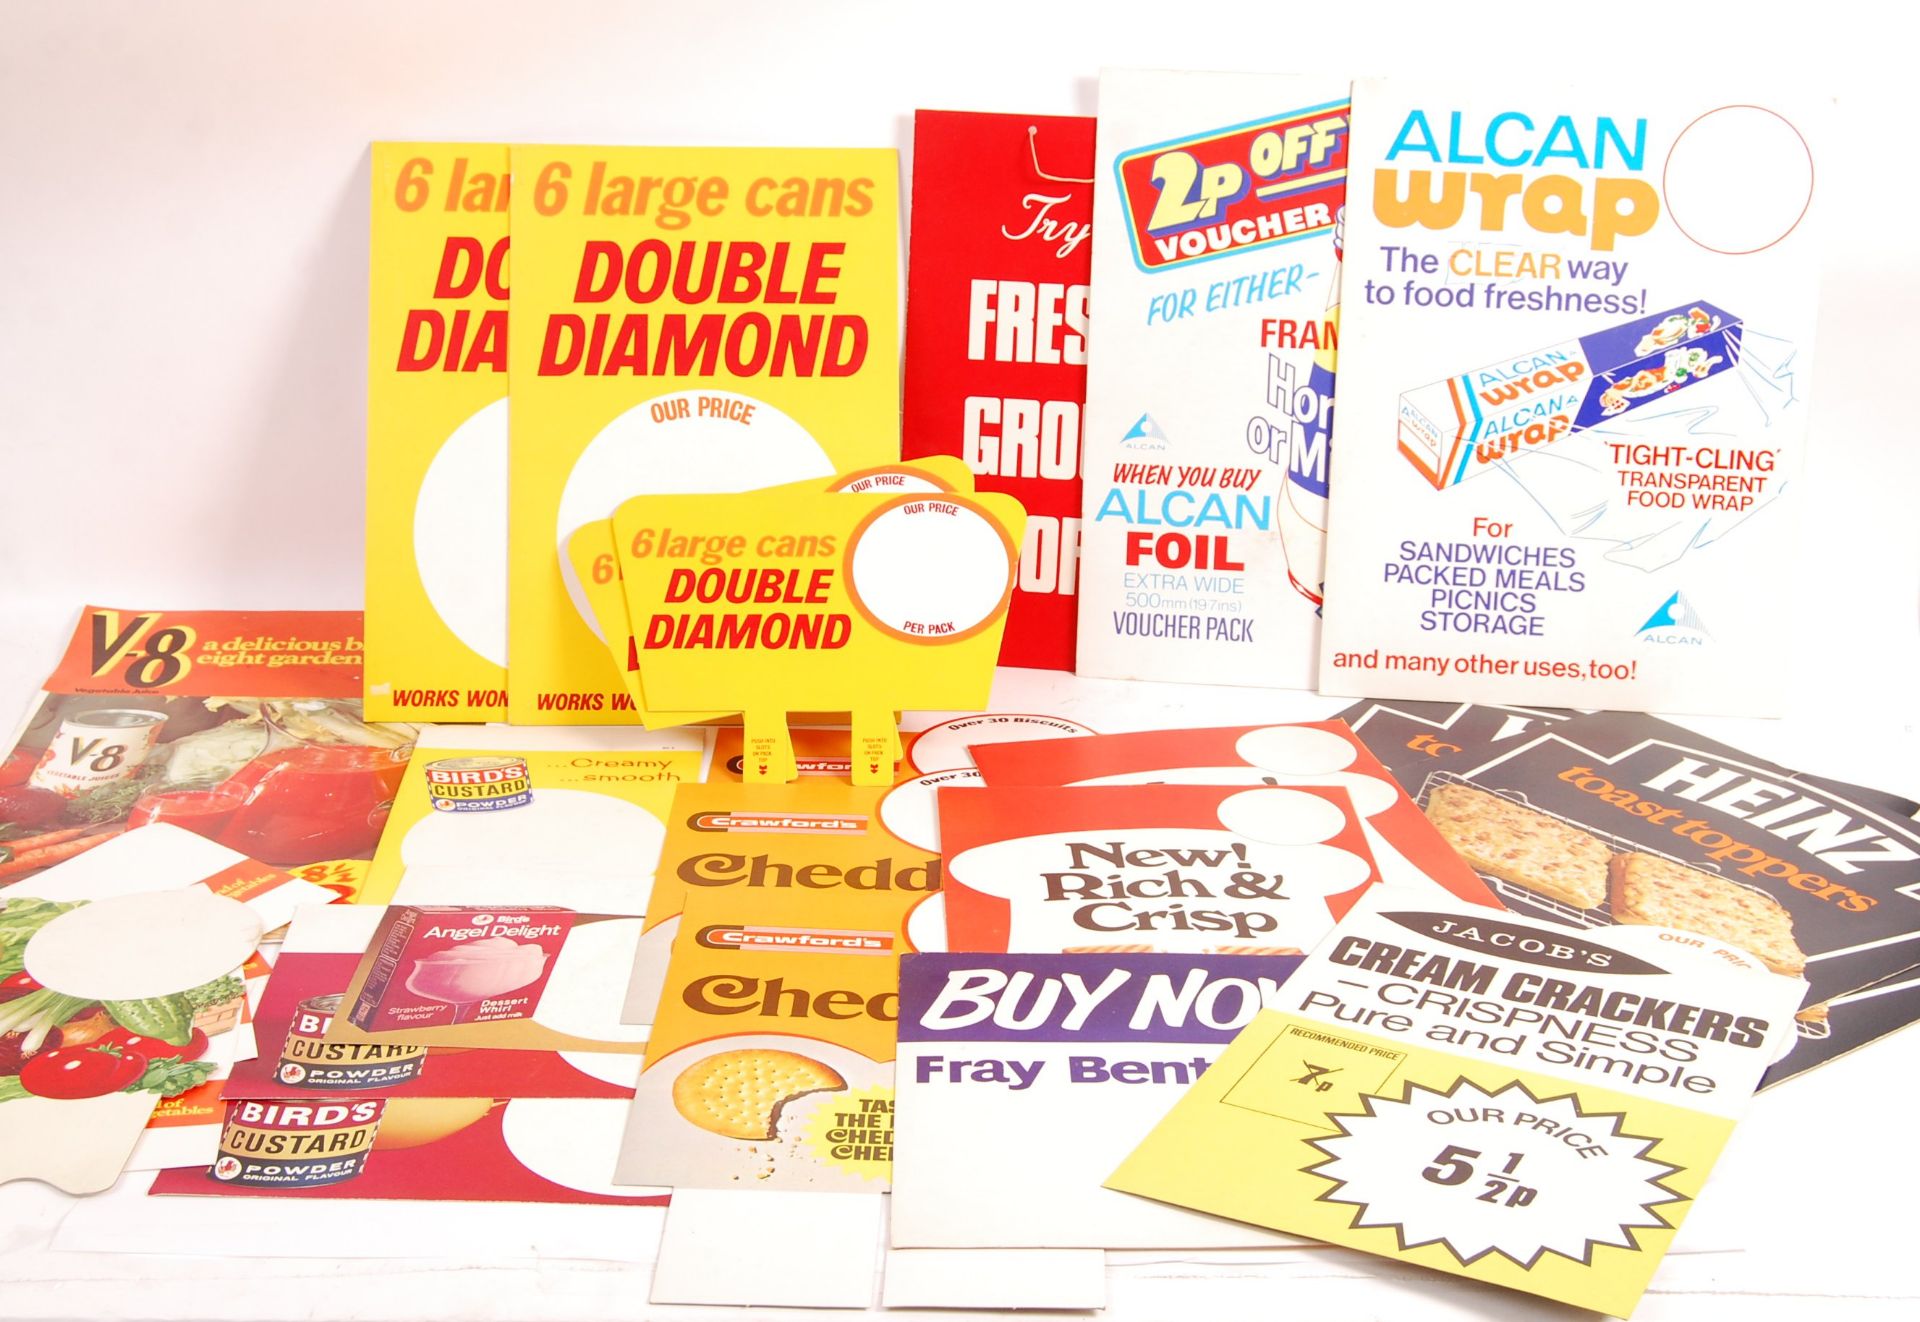 STUNNING 1970'S / 80'S RETRO PROMOTIONAL PRICE POINT ADVERTISING